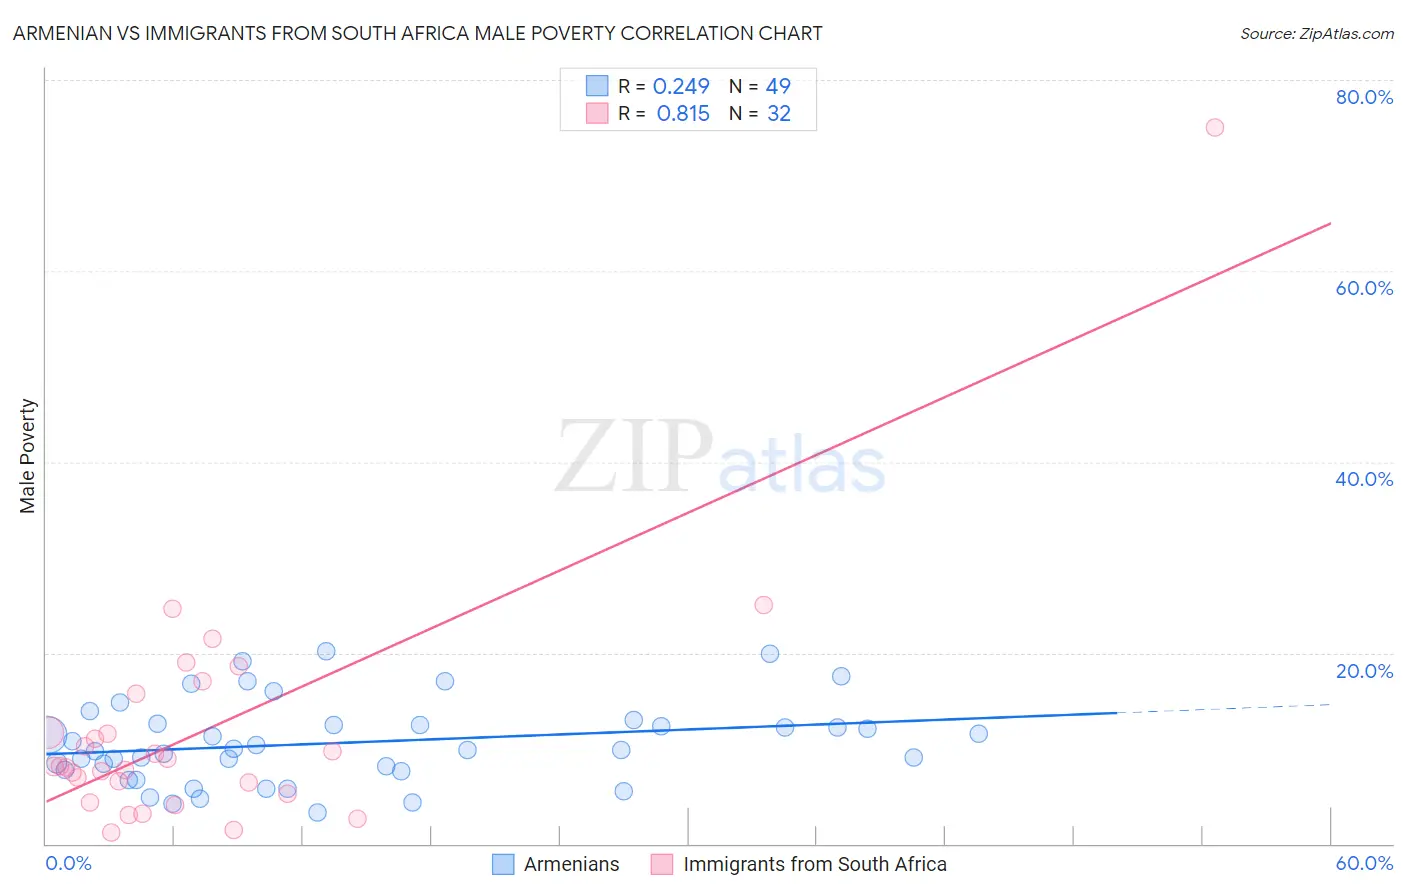 Armenian vs Immigrants from South Africa Male Poverty